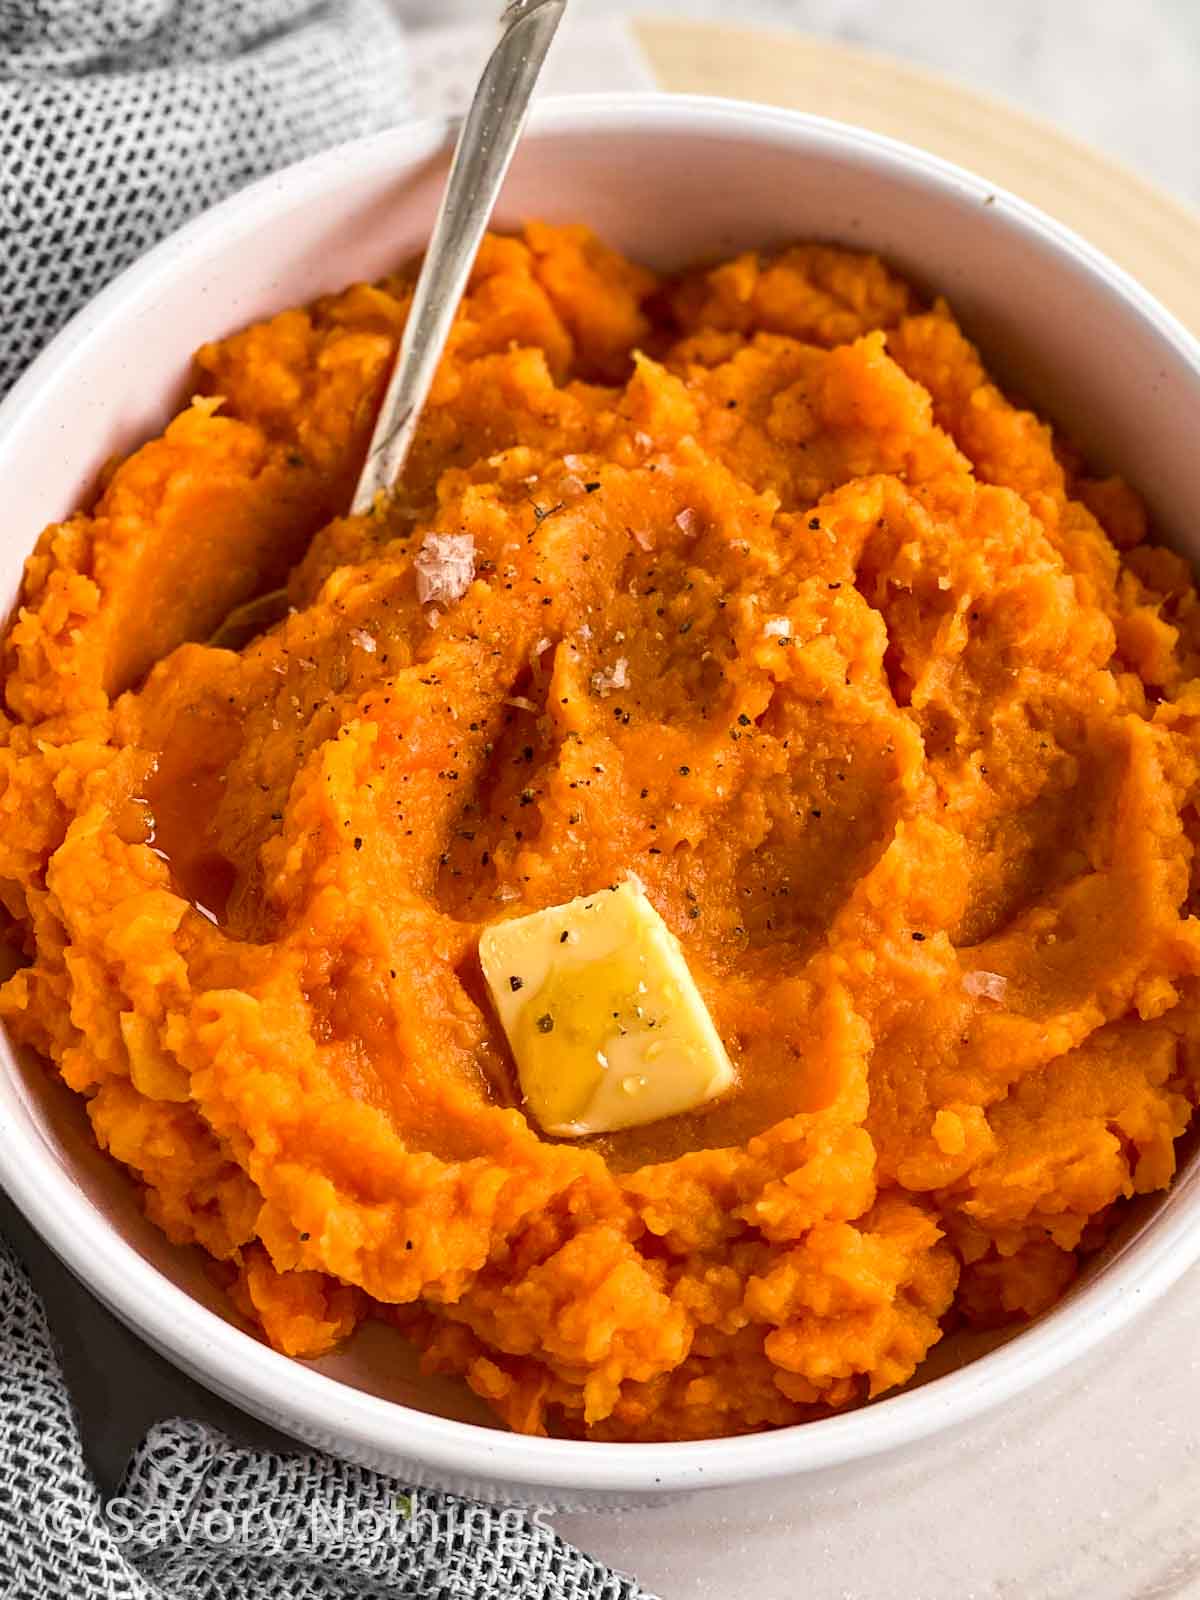 frontal view of bowl filled with mashed sweet potatoes garnished with pat of butter